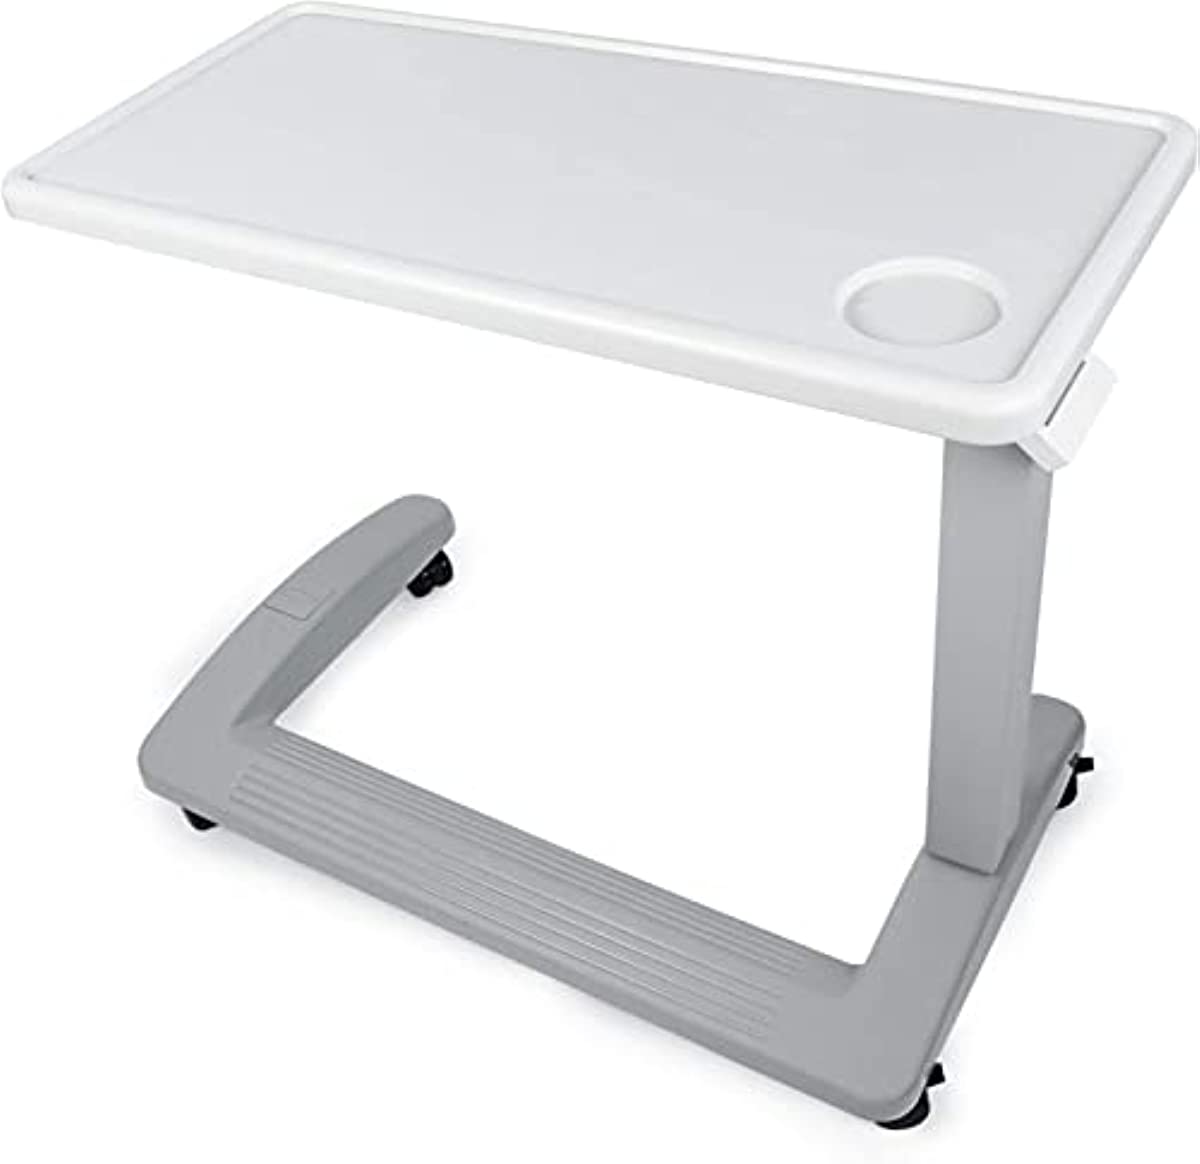 Vaunn Medical Adjustable Overbed Bedside Table with Wheels (Hospital and Home Use), New Tabletop